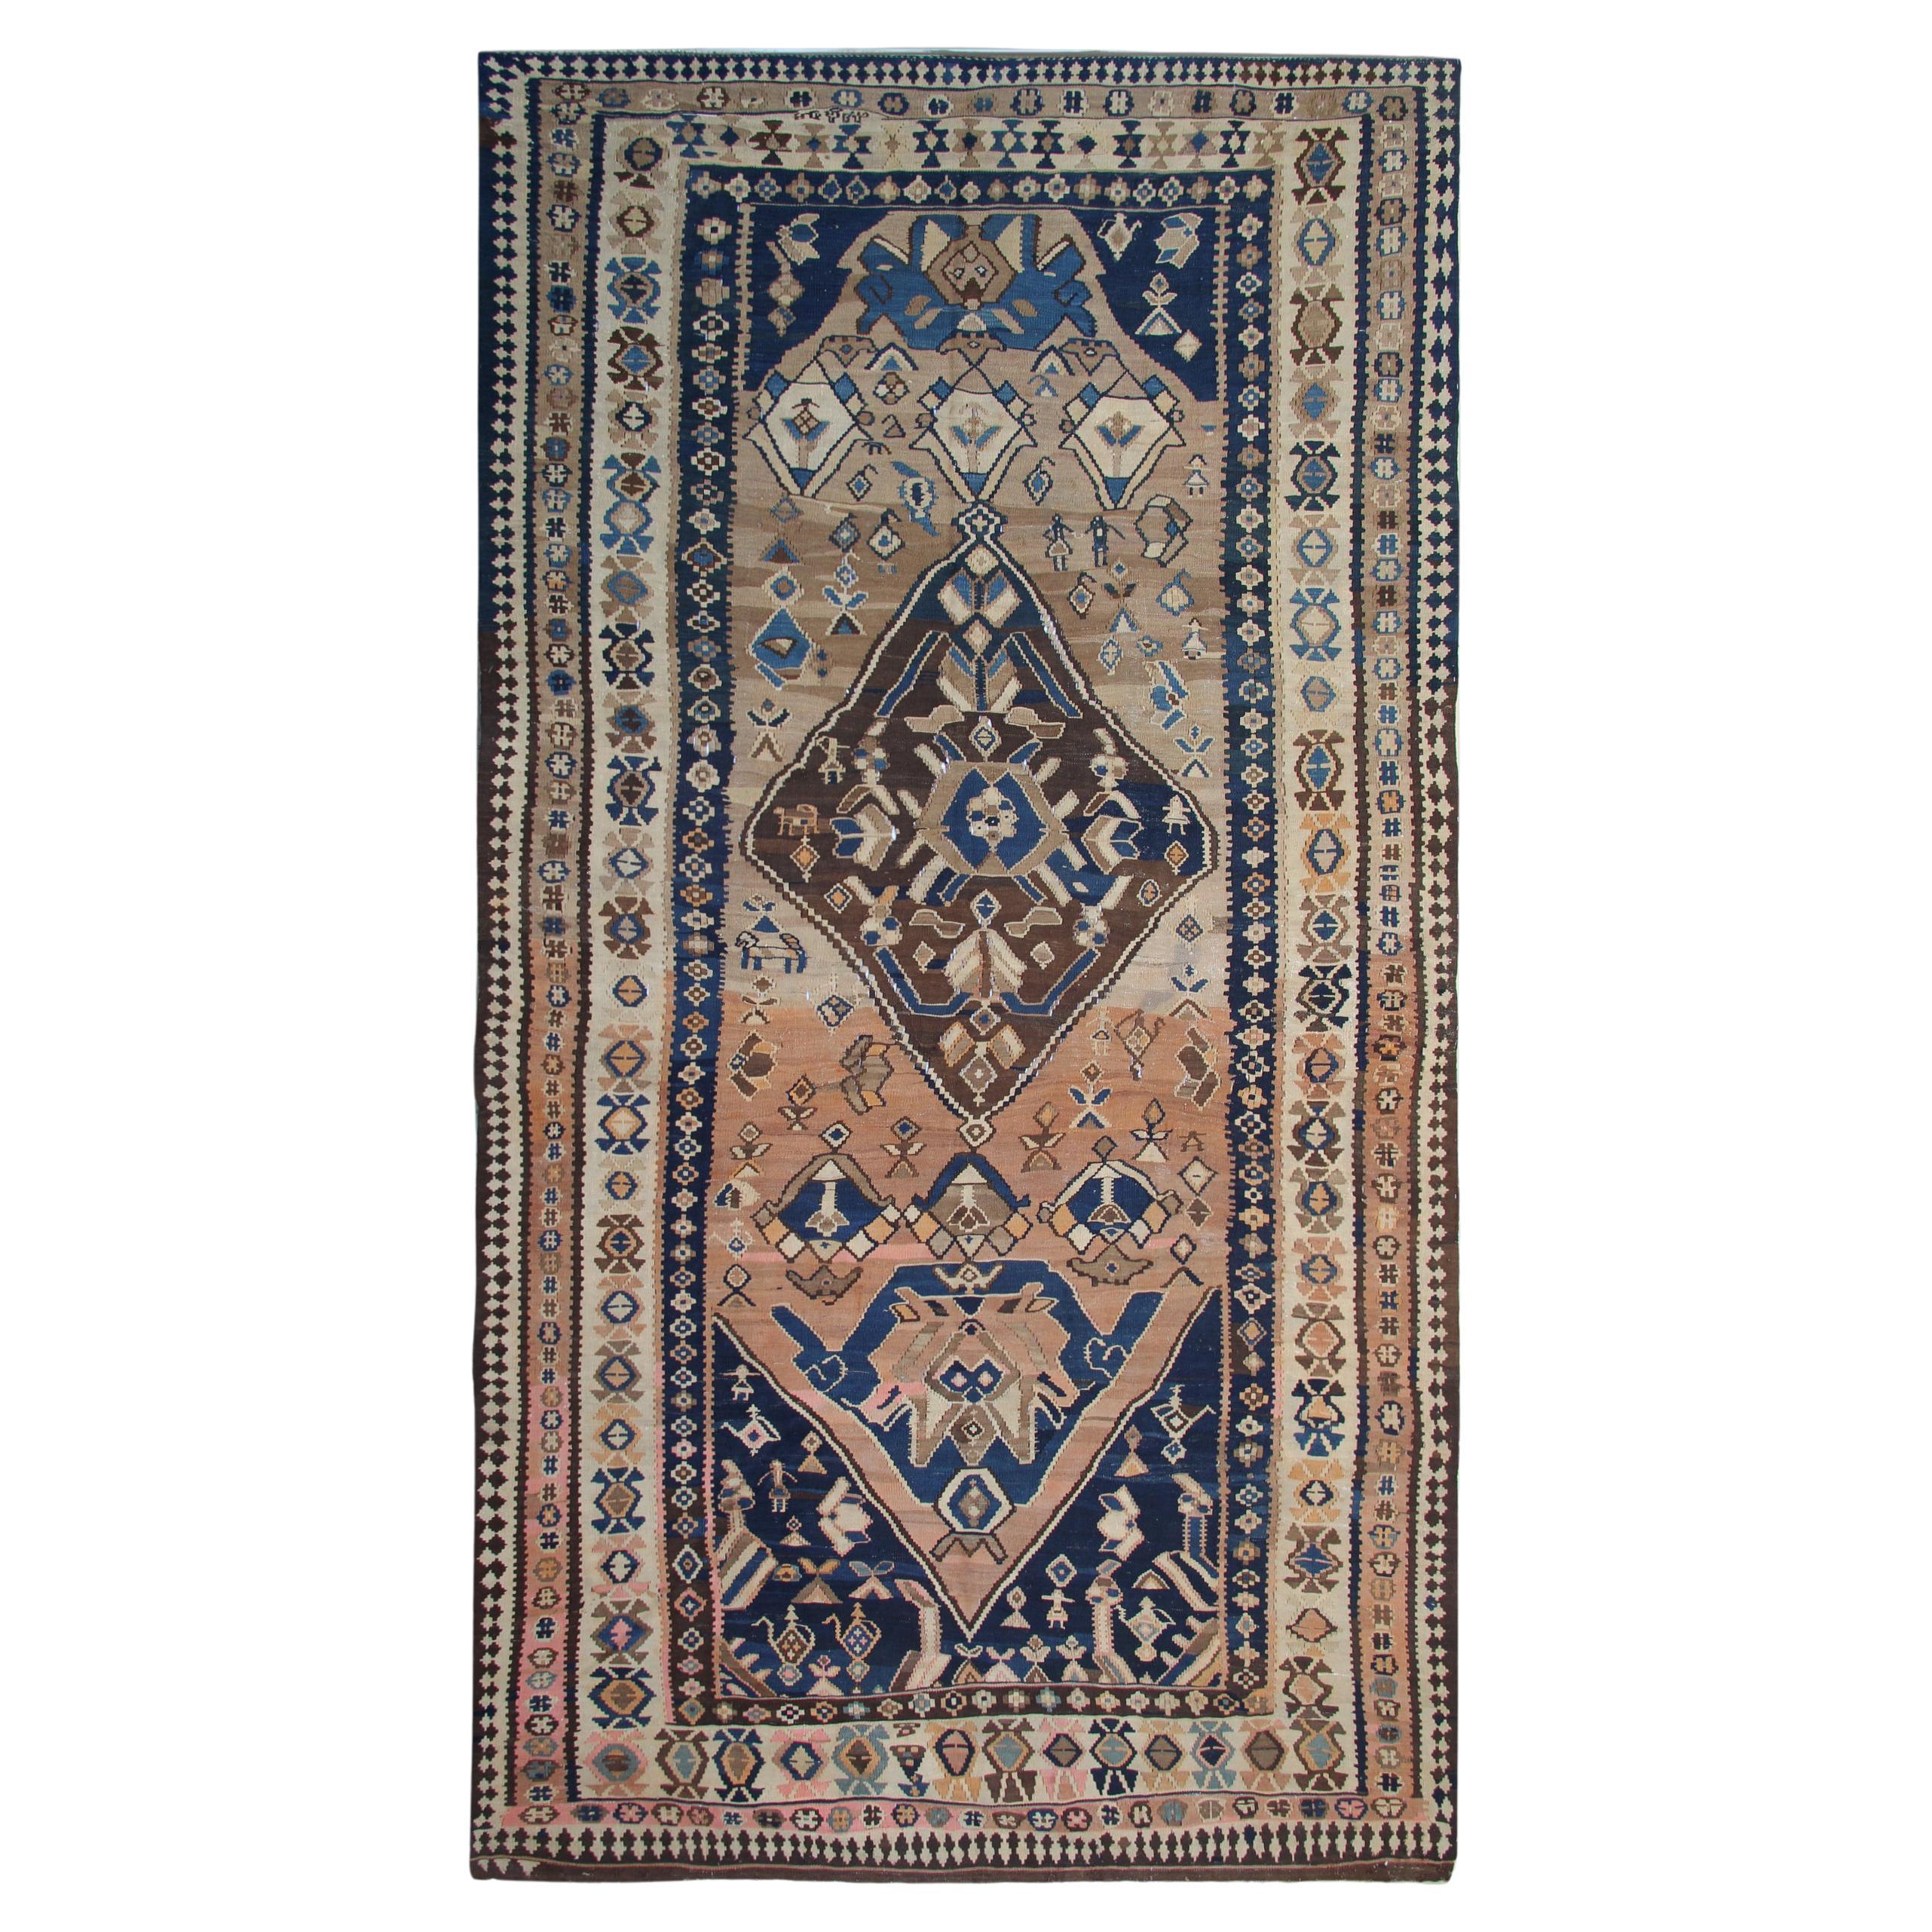 Brown Wool Kilim Rug Antique Carpet Traditional Flat-Woven Area Rug